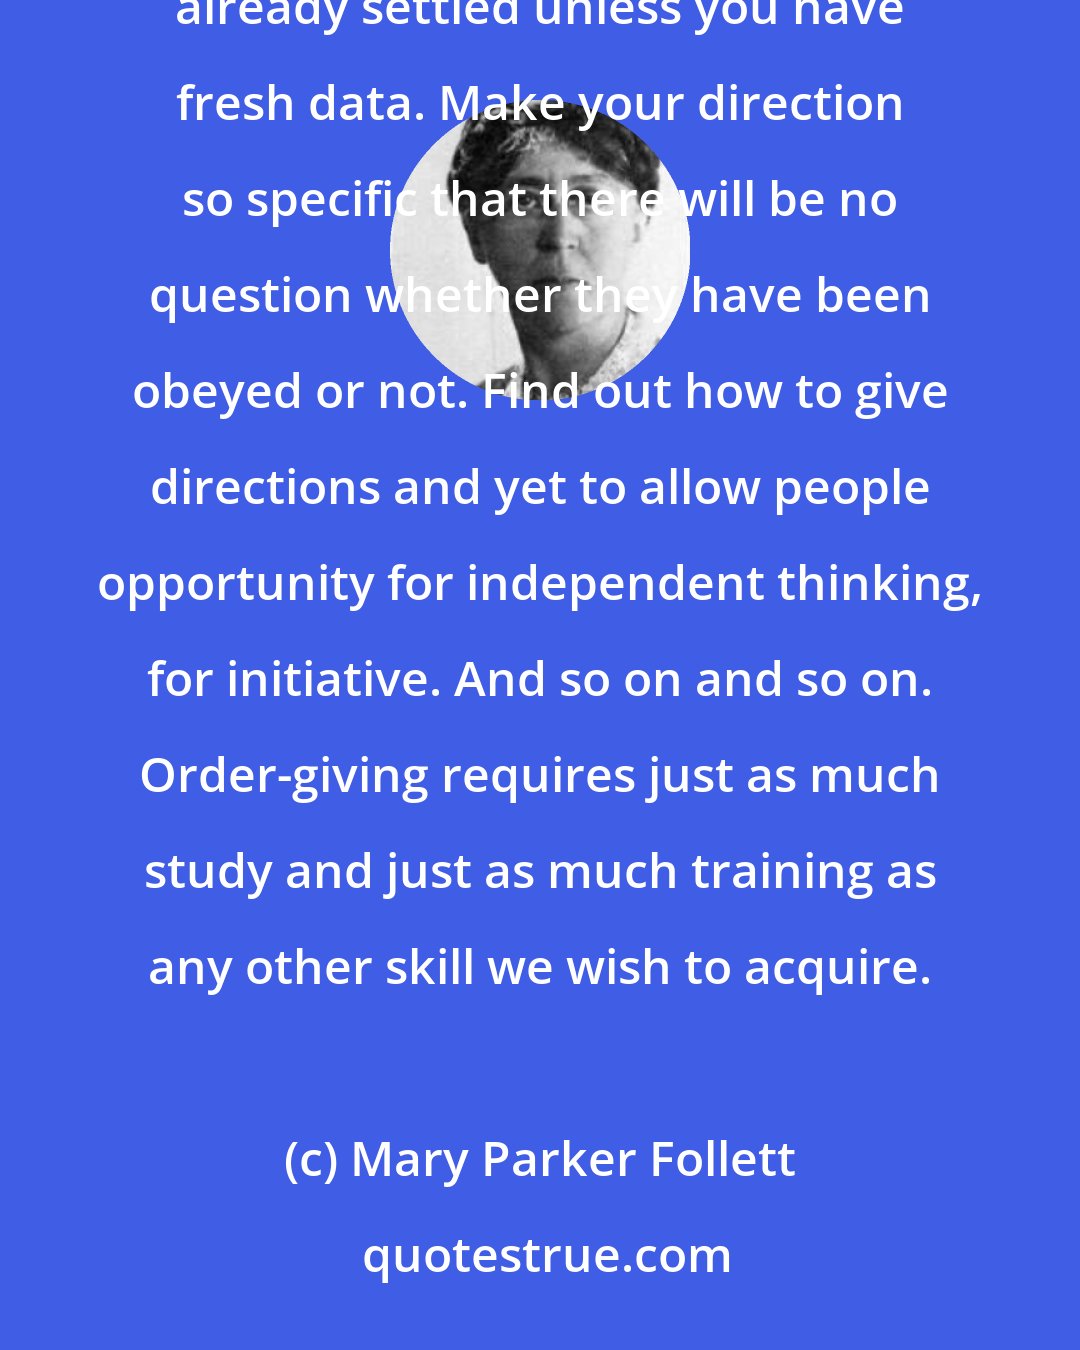 Mary Parker Follett: many rules could be made for the giving of orders. Don't preach when you give orders. Don't discuss matters already settled unless you have fresh data. Make your direction so specific that there will be no question whether they have been obeyed or not. Find out how to give directions and yet to allow people opportunity for independent thinking, for initiative. And so on and so on. Order-giving requires just as much study and just as much training as any other skill we wish to acquire.